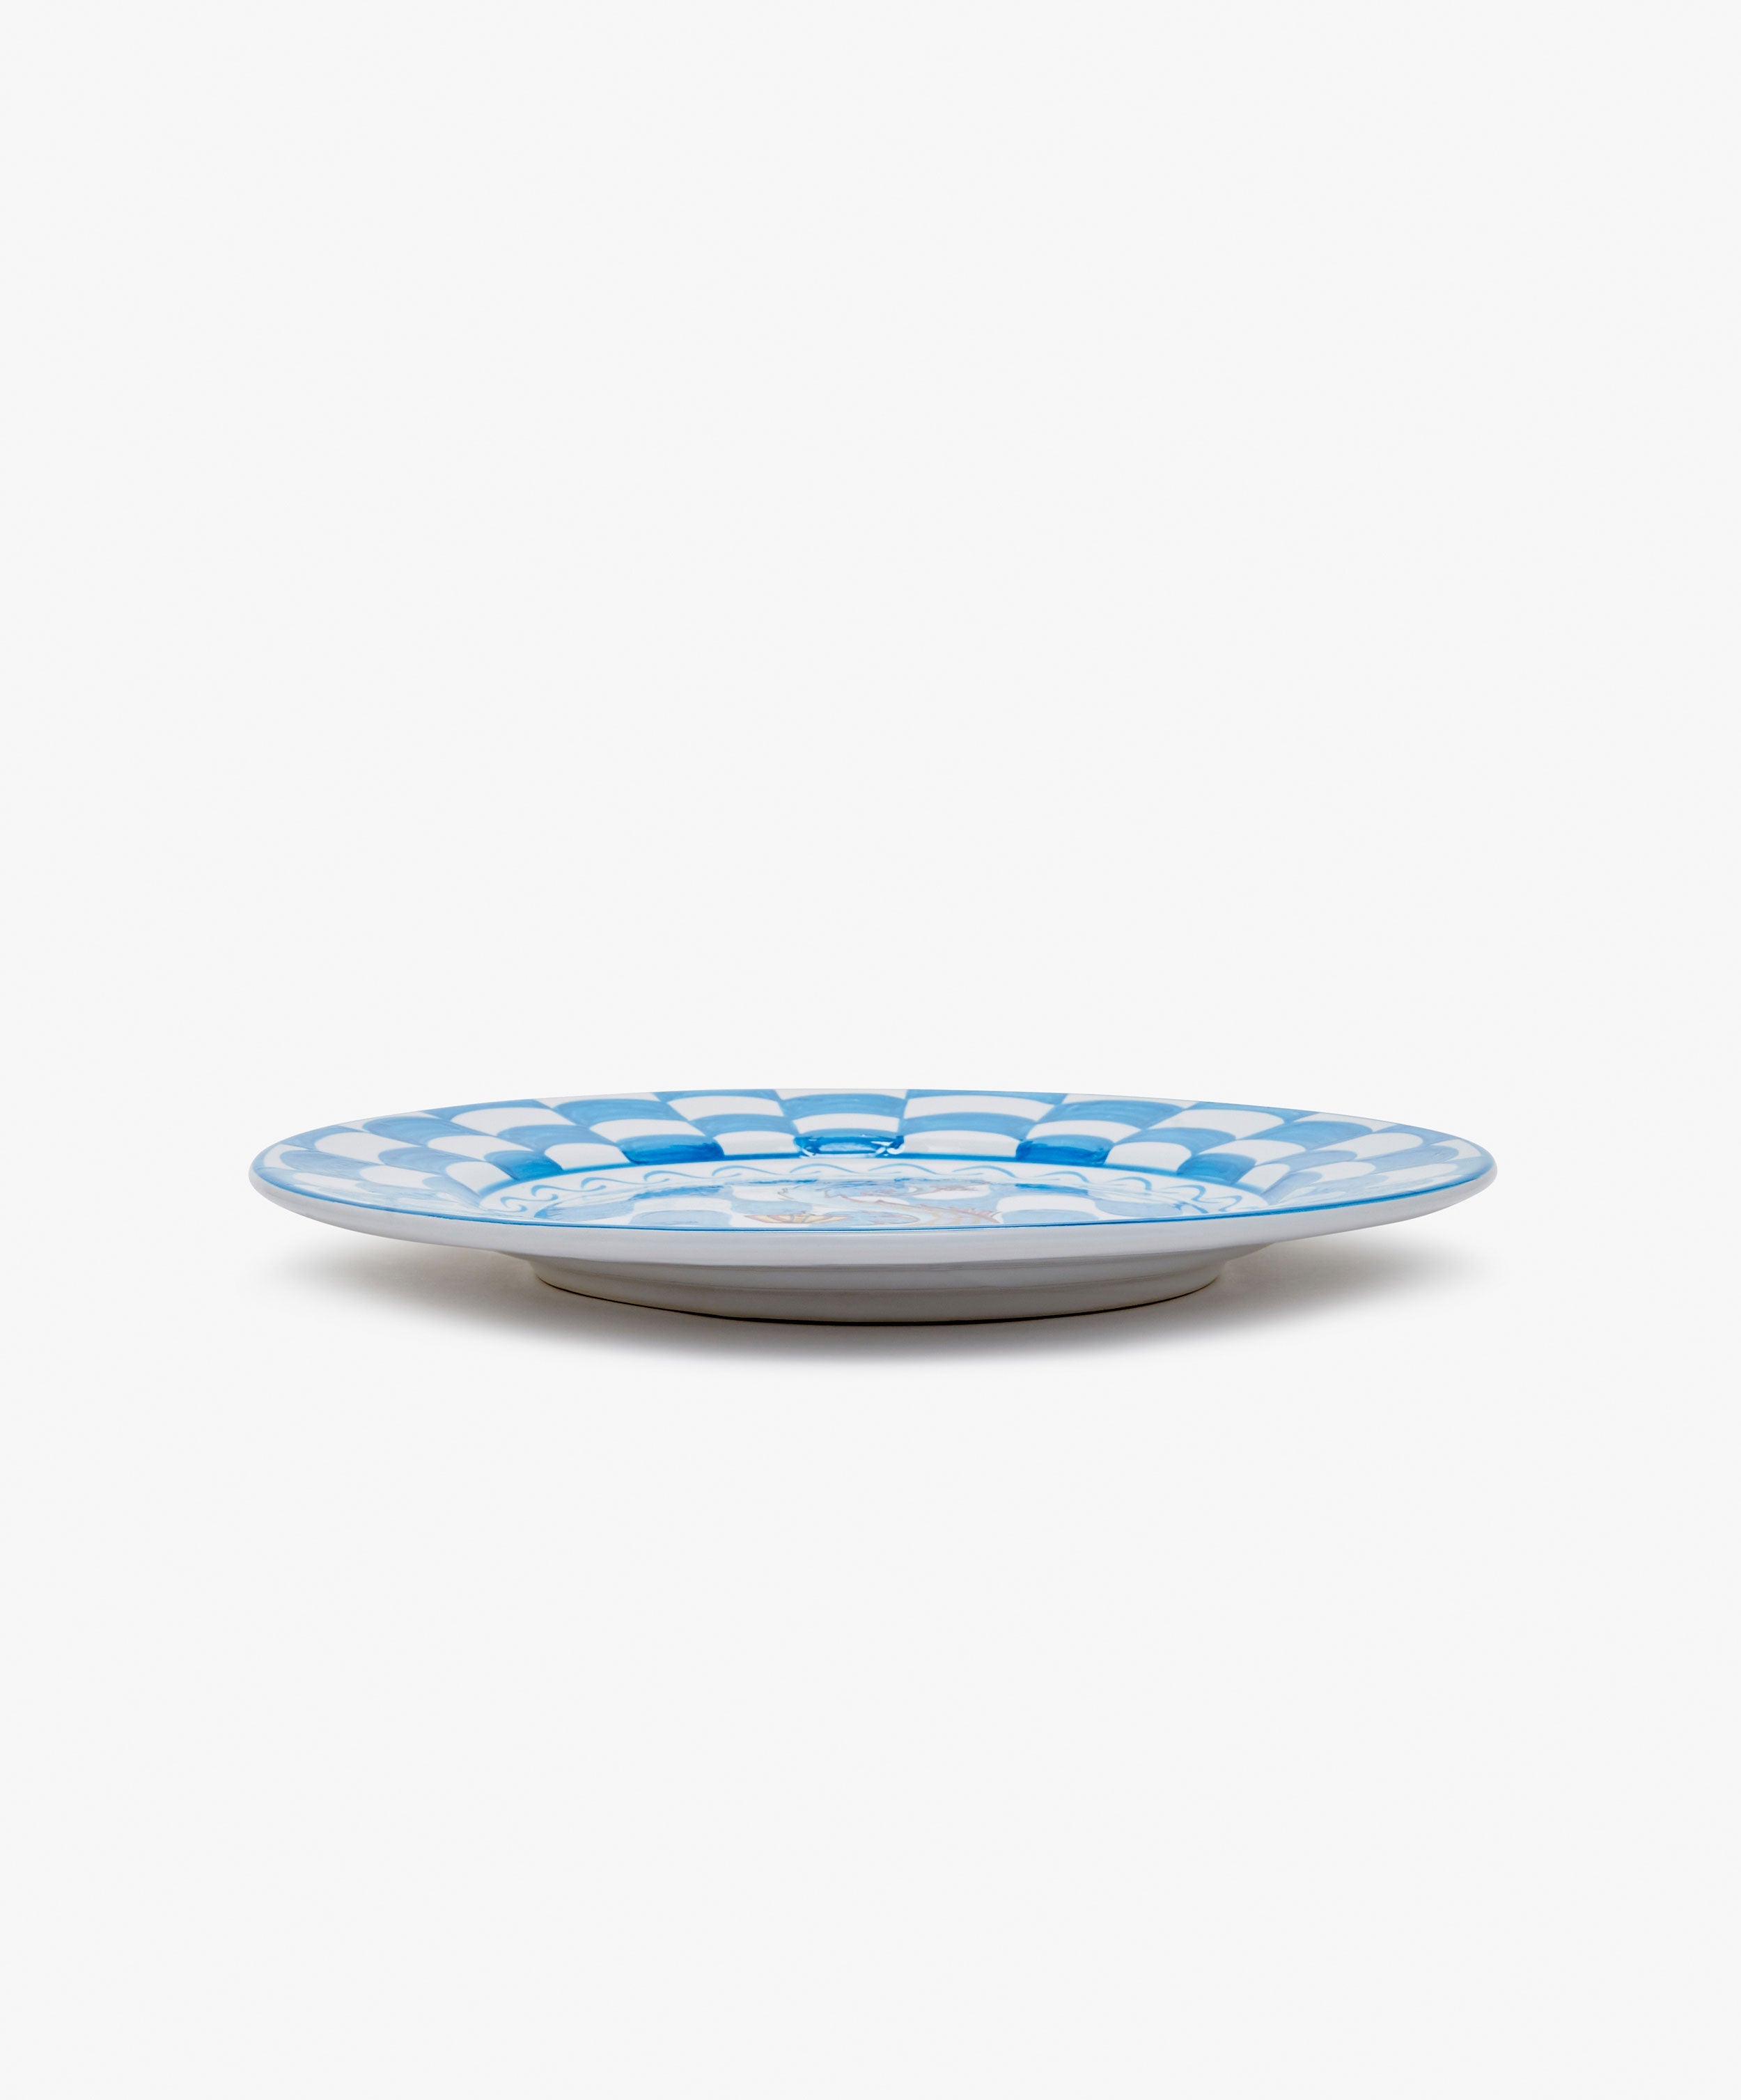 Palio Dinner Plate, The Wave